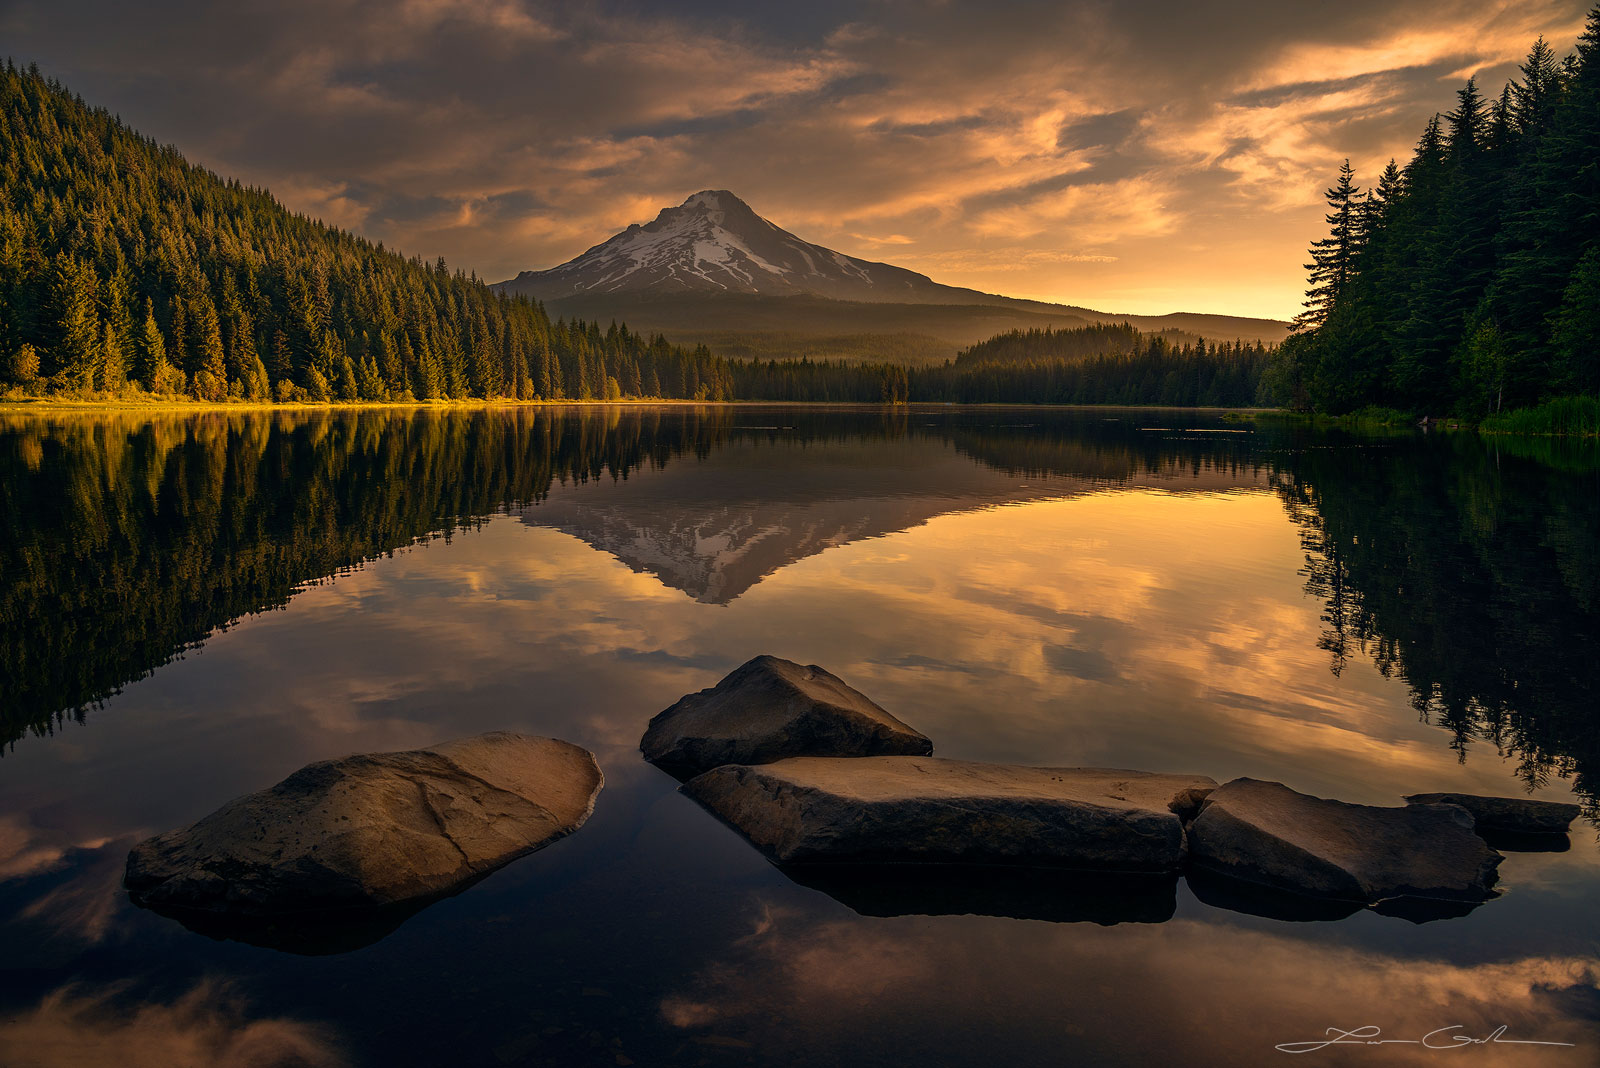 Mt Hood at sunrise and its reflection in a calm mountain lake surrounded by evergreen trees, Oregon